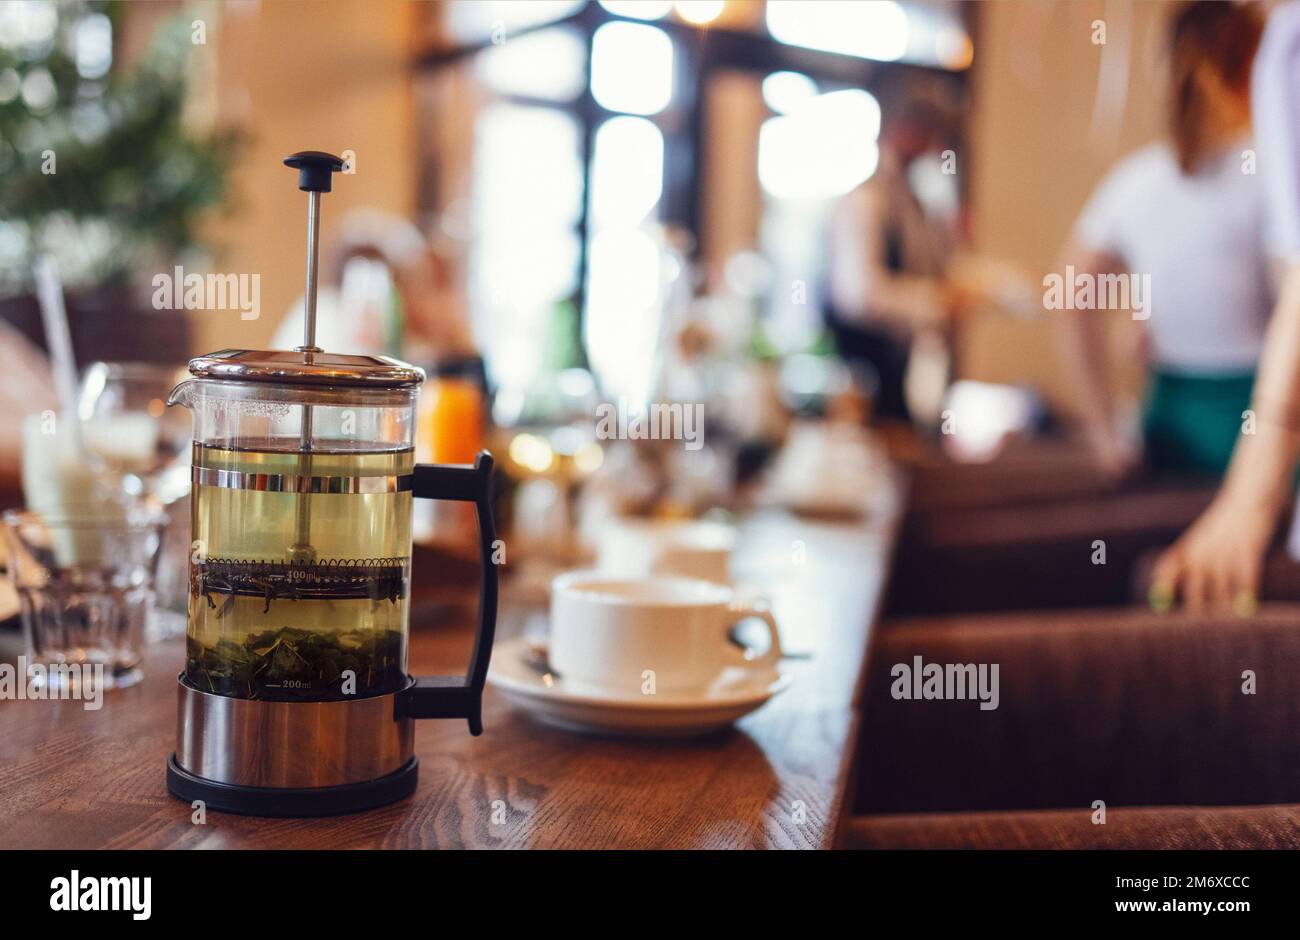 Close up of wooden table serving glass french press tea maker, cups with fresh beverage Stock Photo